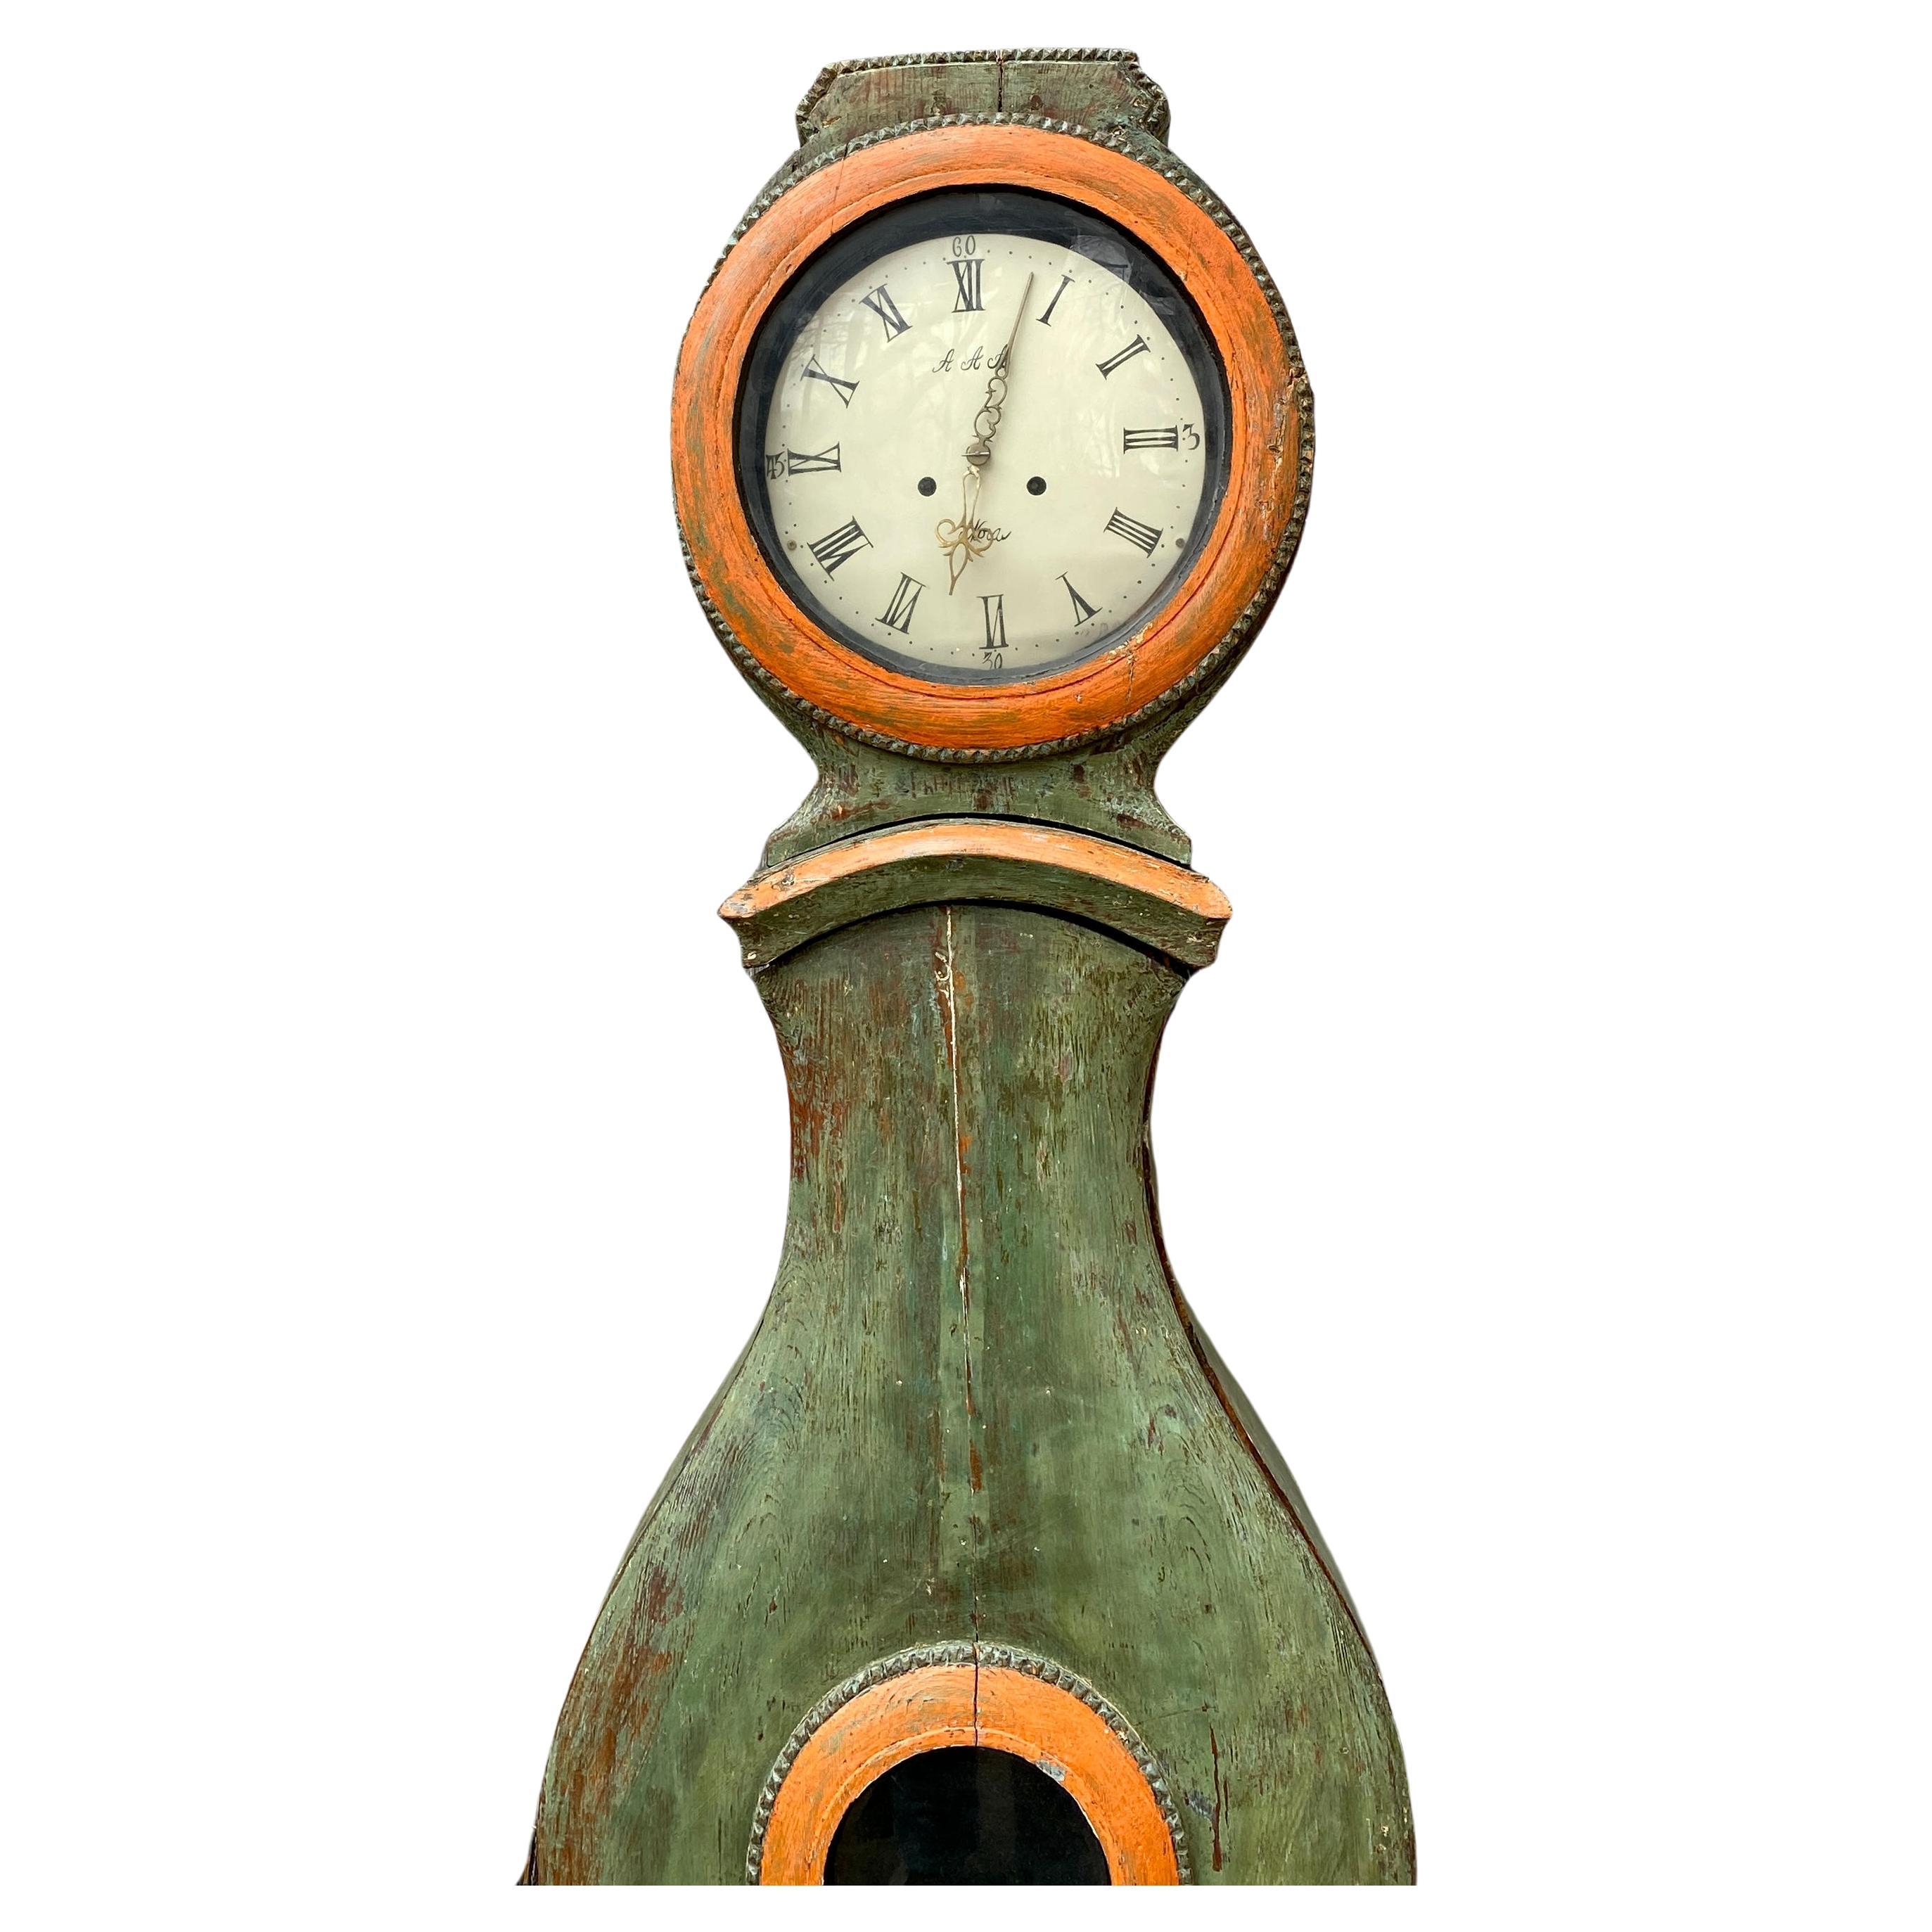 Hand-Painted Swedish Gustavian Mora Clock in Original Green Orange Colors, Early 19th Century For Sale